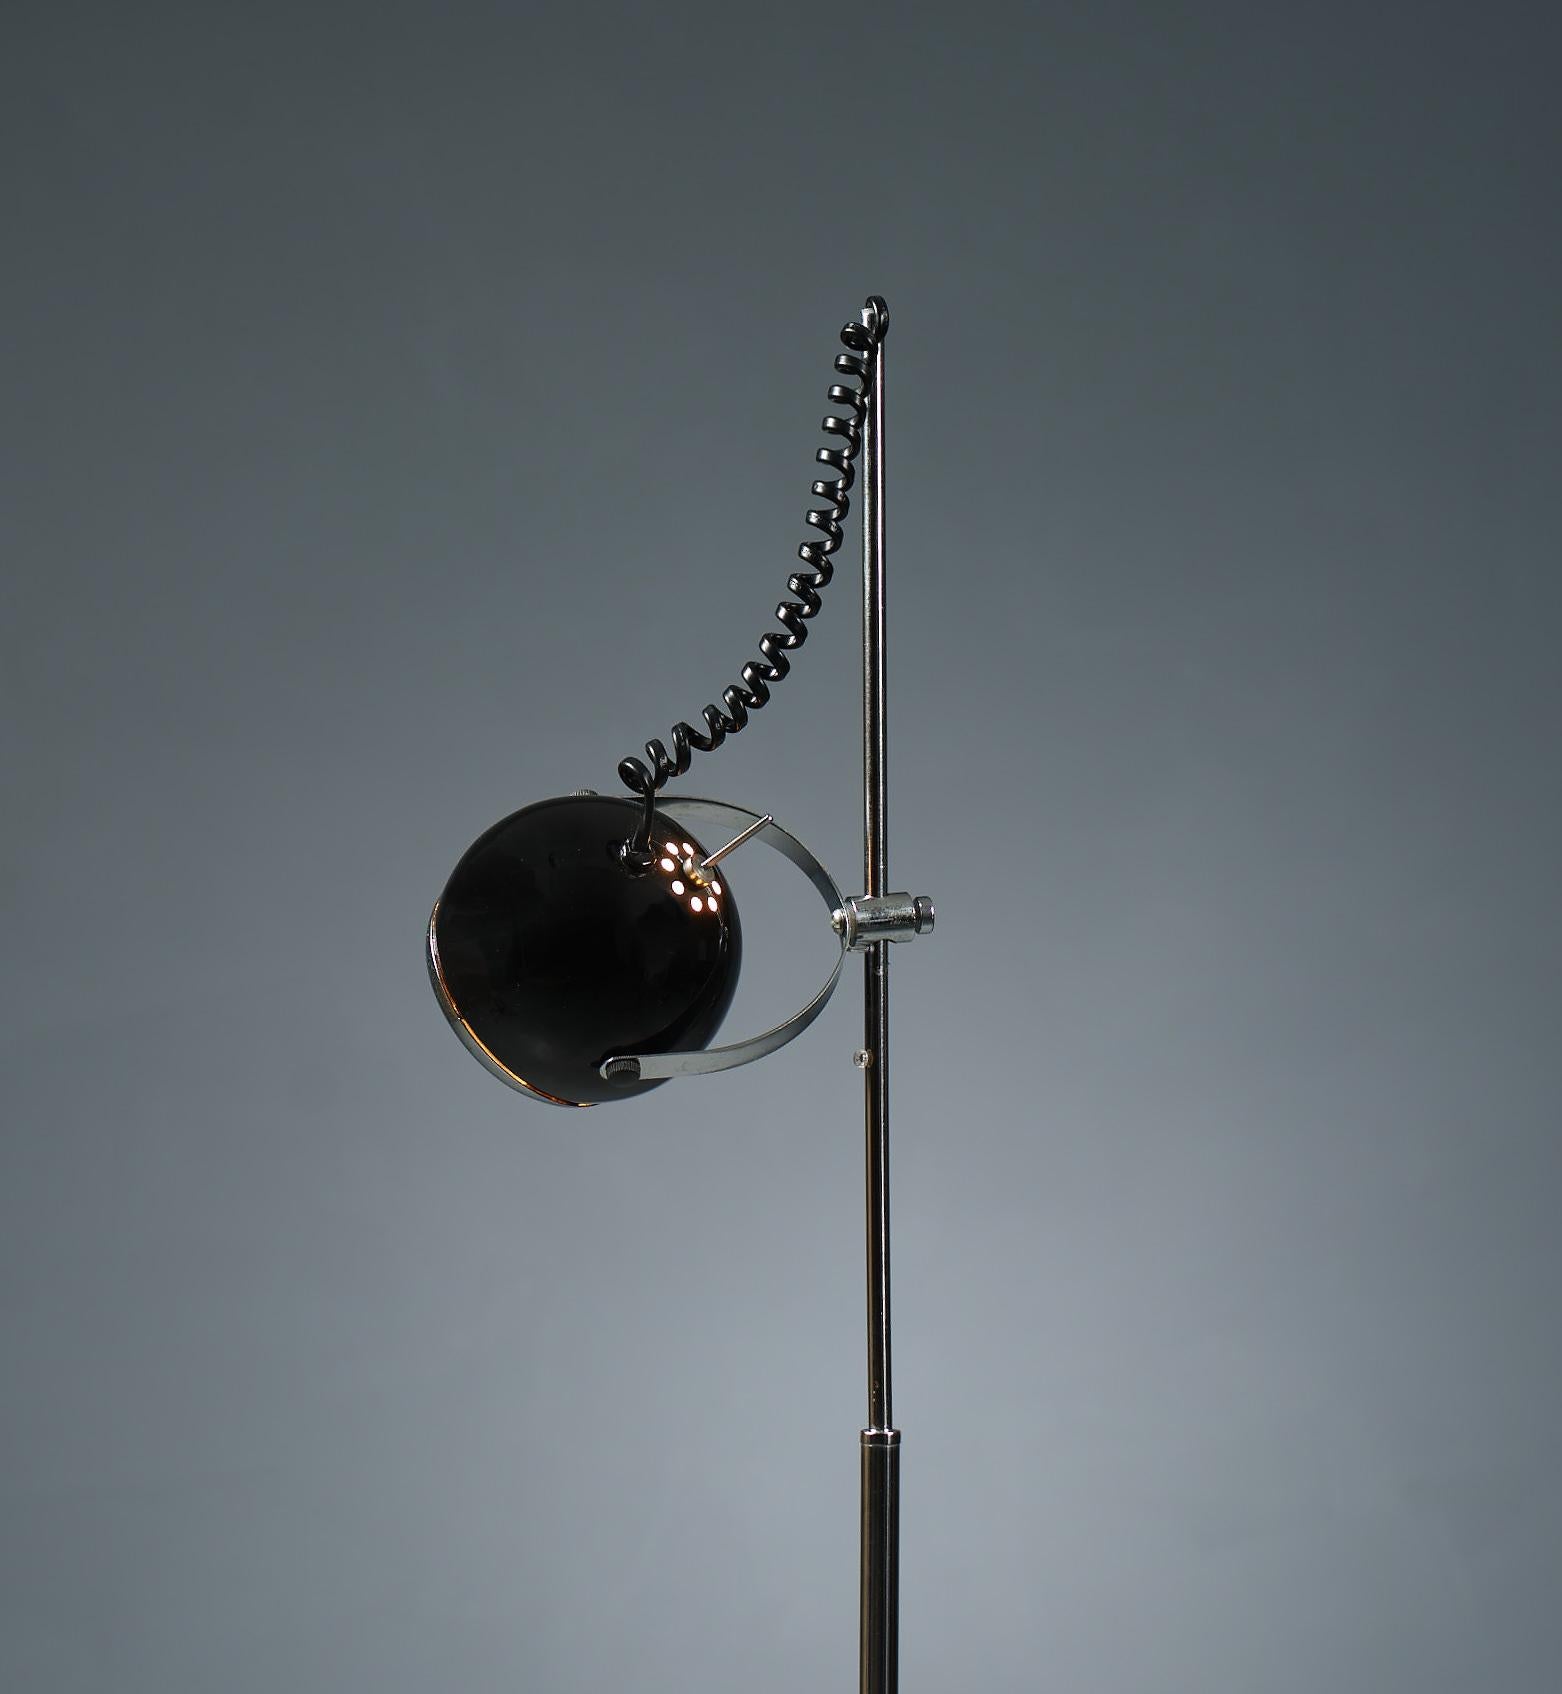 Vintage floor lamp from the 1970s. Crafted in Italy, it boasts a sleek chrome steel construction complemented by black lacquered accents. The adjustable spherical diffuser offers omnidirectional lighting, while its height can be tailored to suit